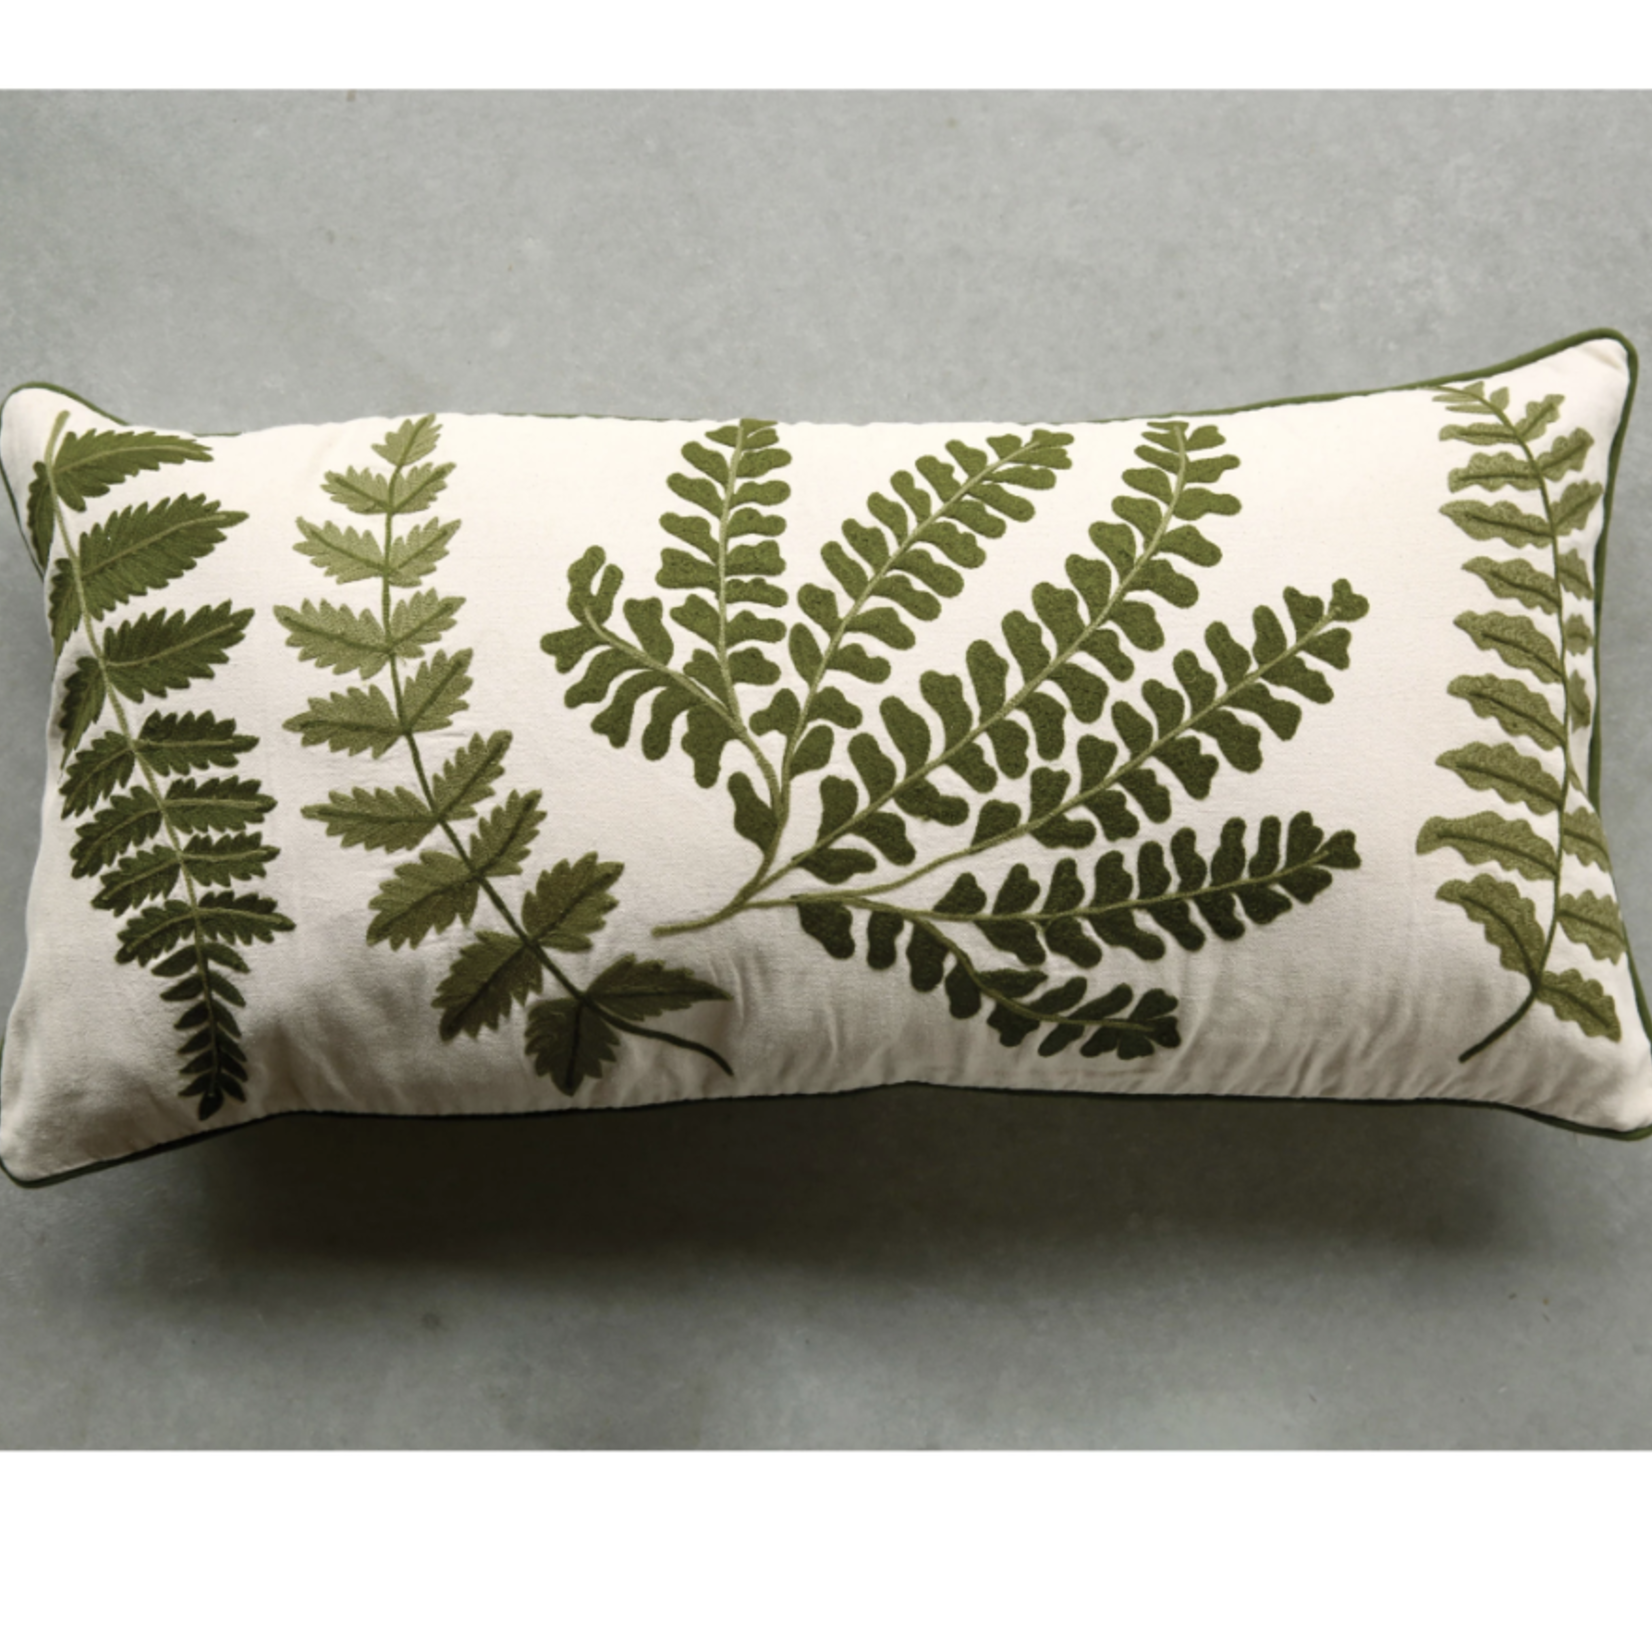 Creative Co-Op 32" x 15" Lumbar Pillow with Fern Fronds Embroidery